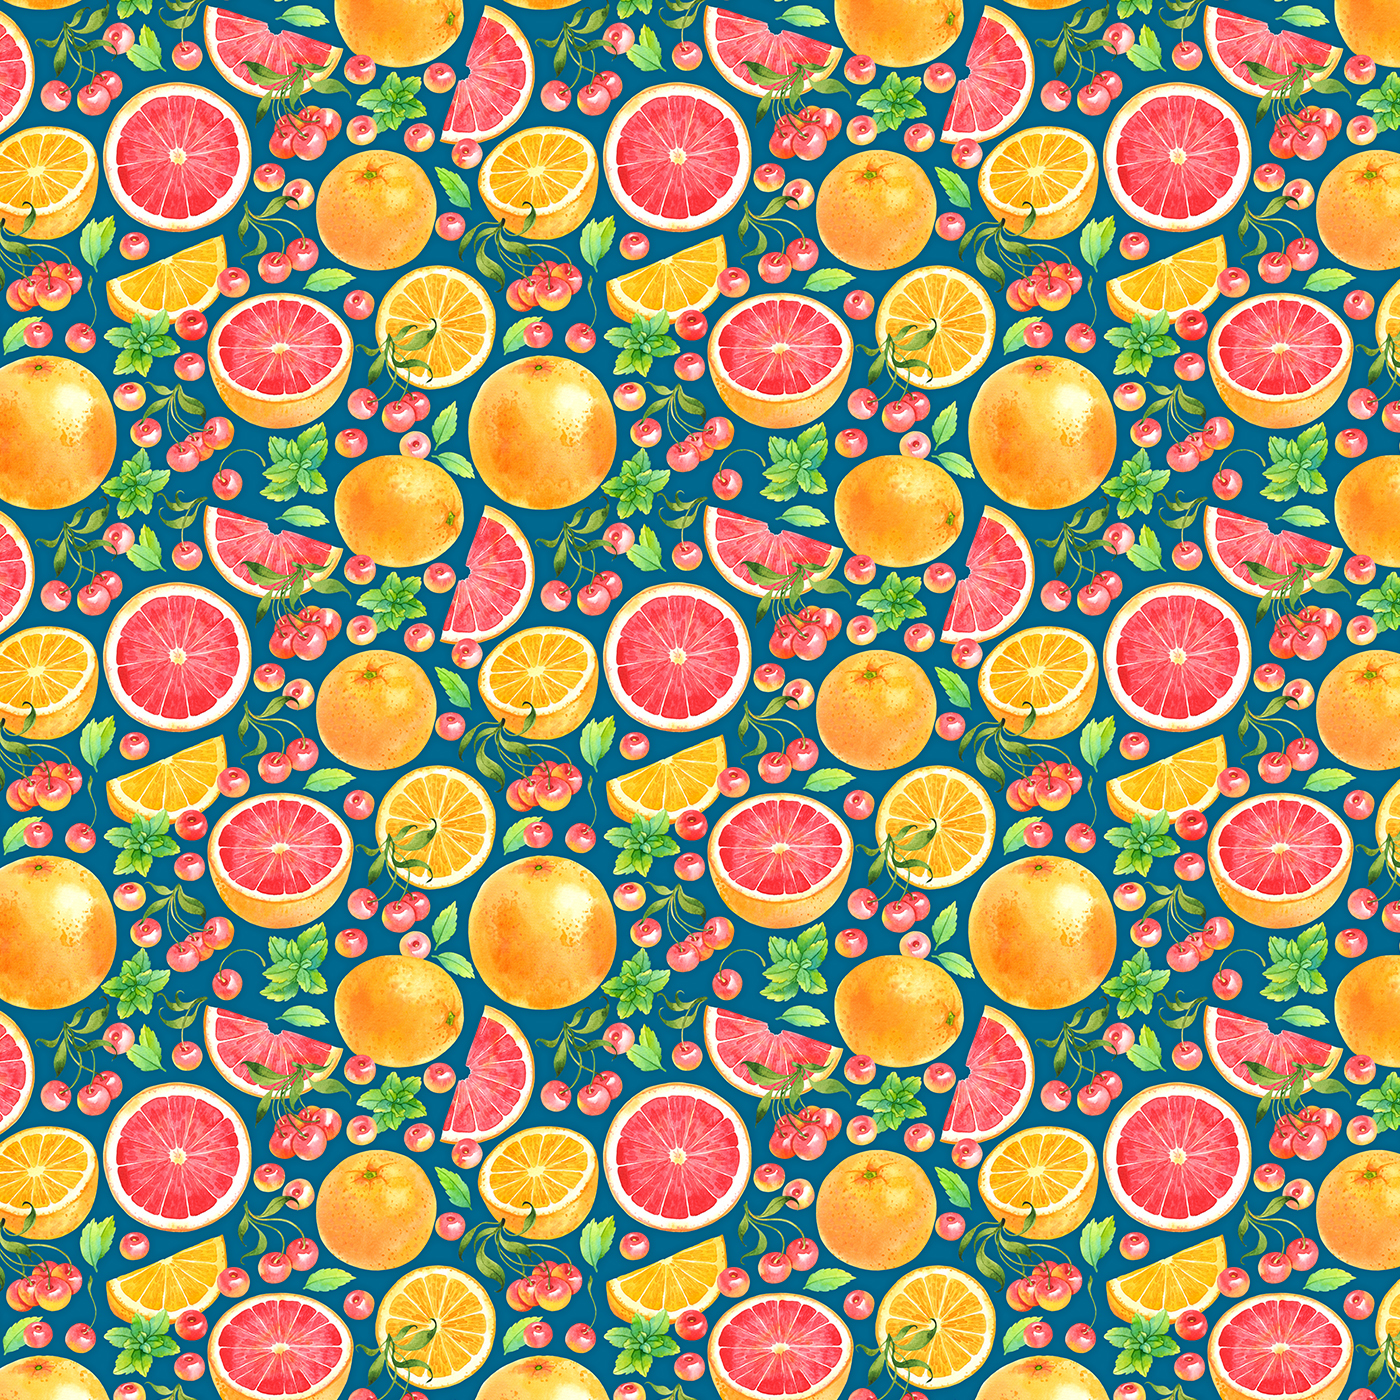 Patterns japan miami All Over smoothies colorfull